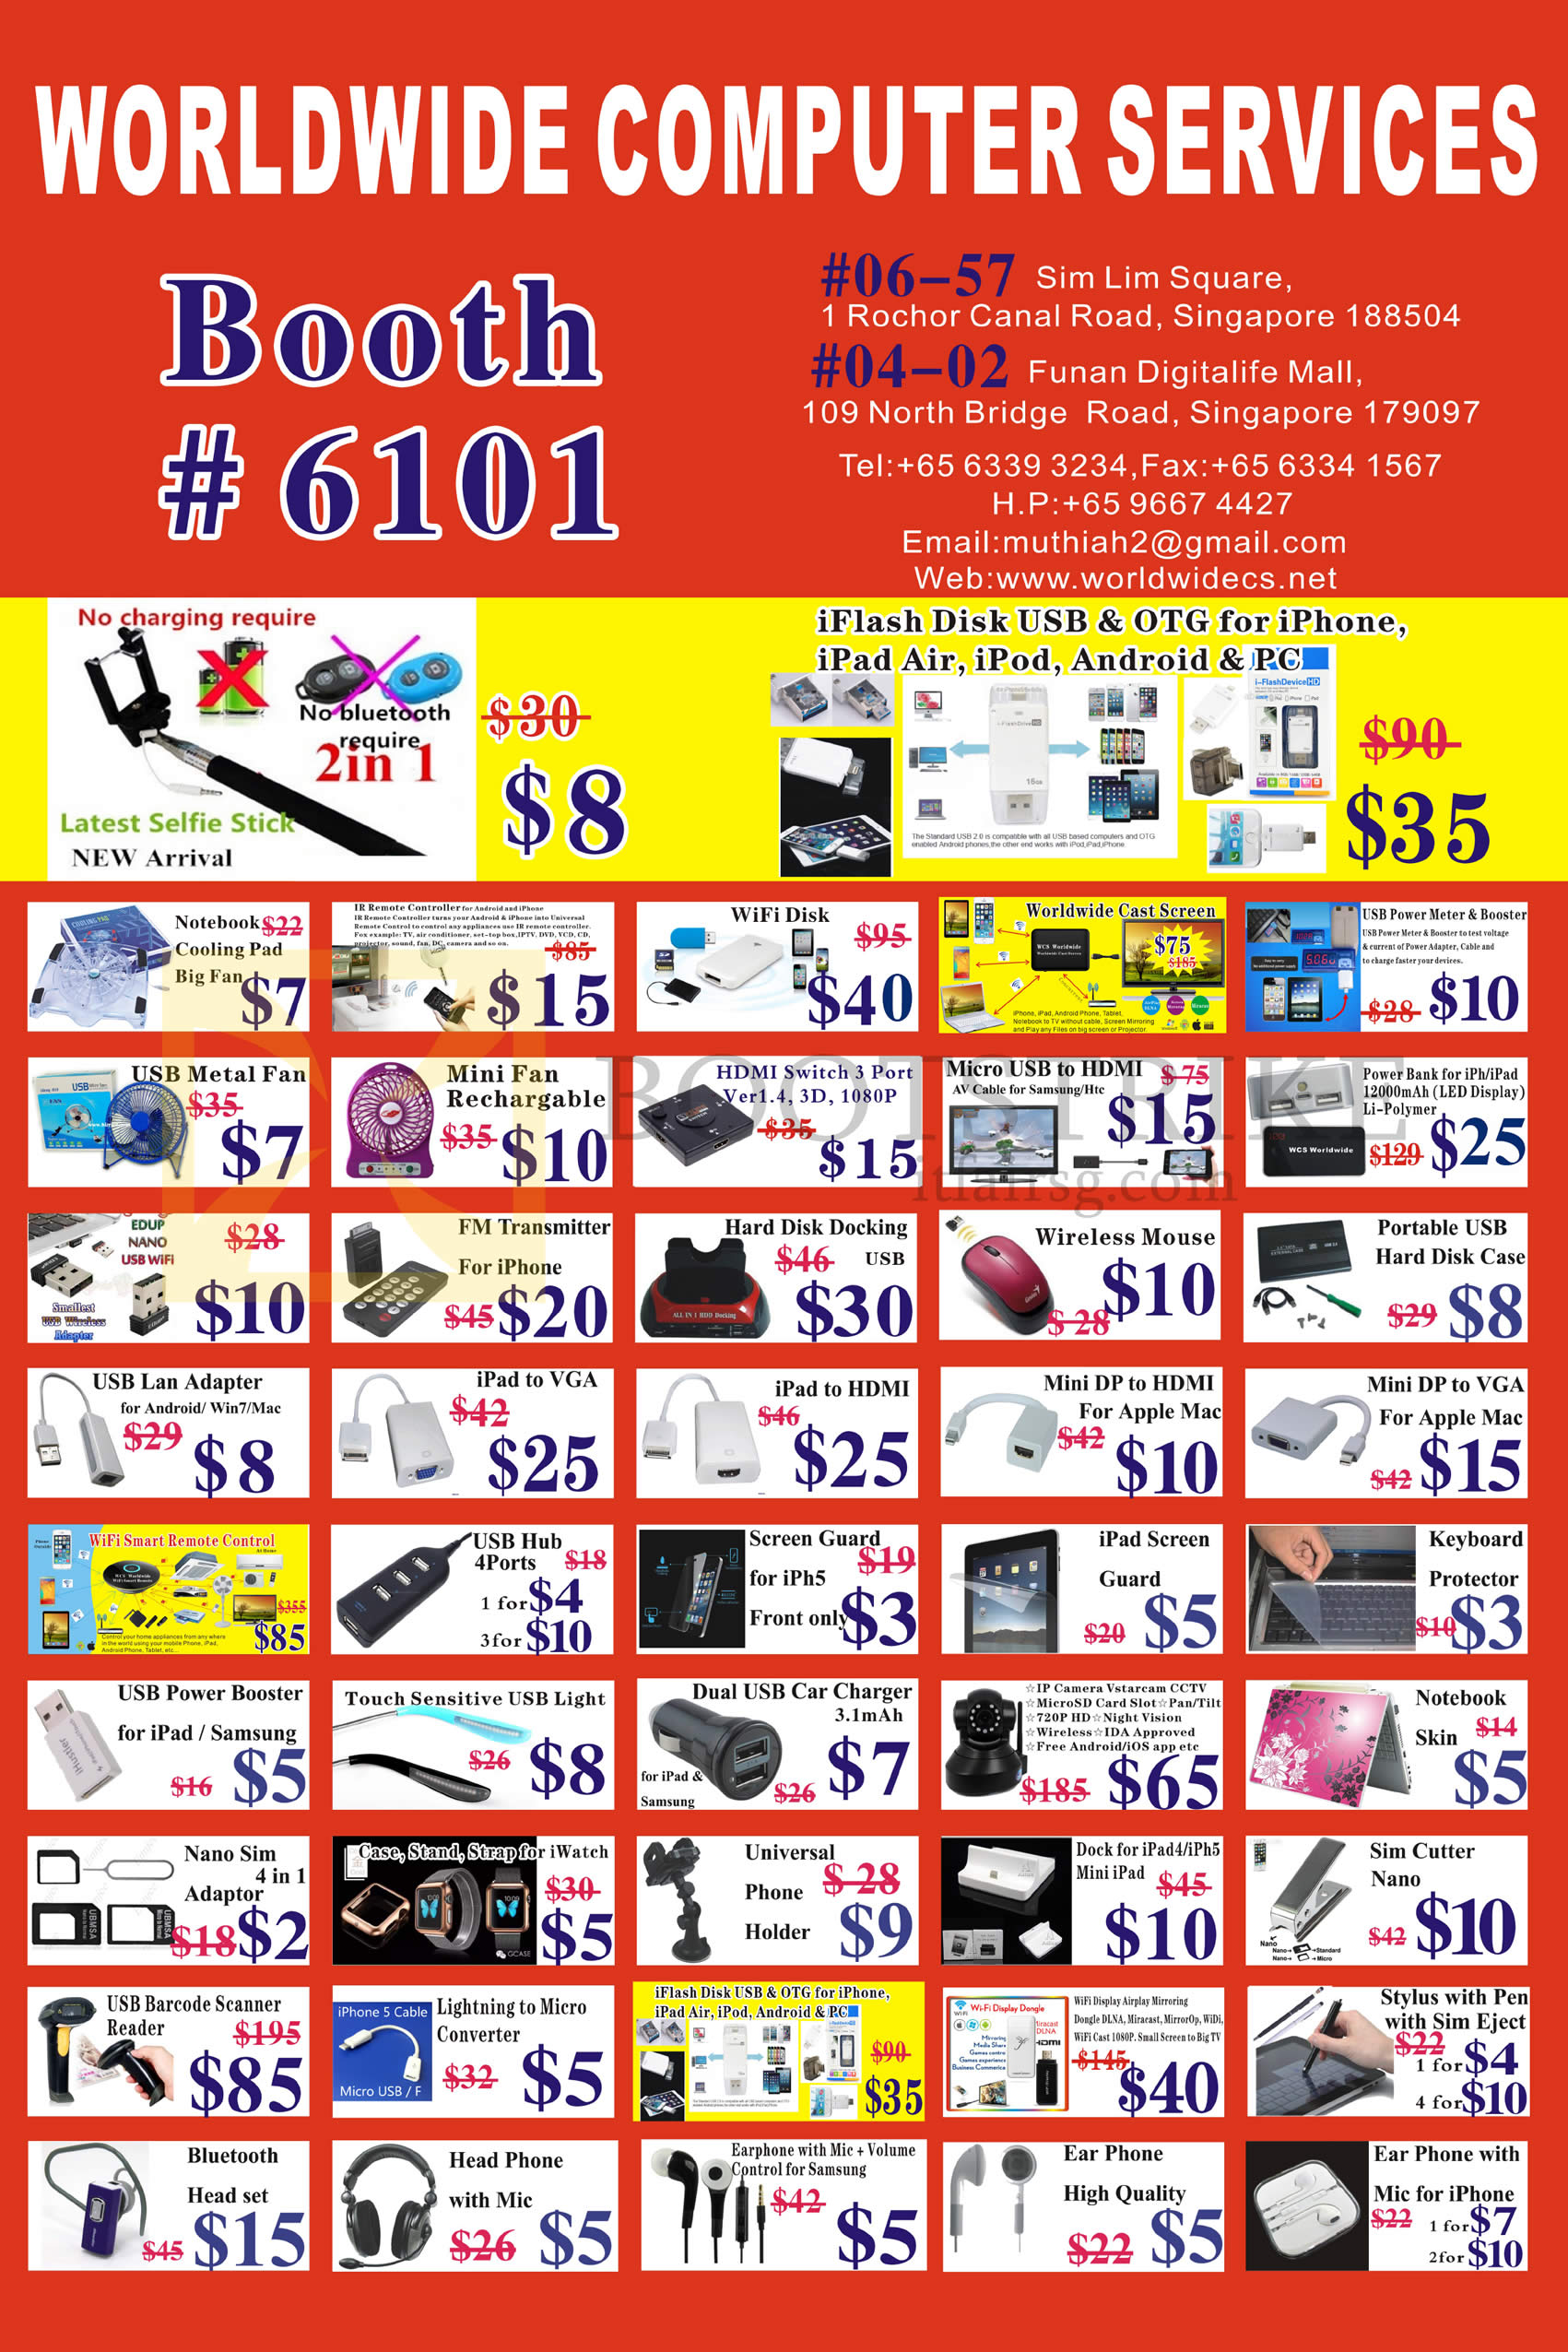 IT SHOW 2016 price list image brochure of Worldwide Computer Services Featured Offers, Accessories, USB, Cables, Charges, Adapters, Earphones